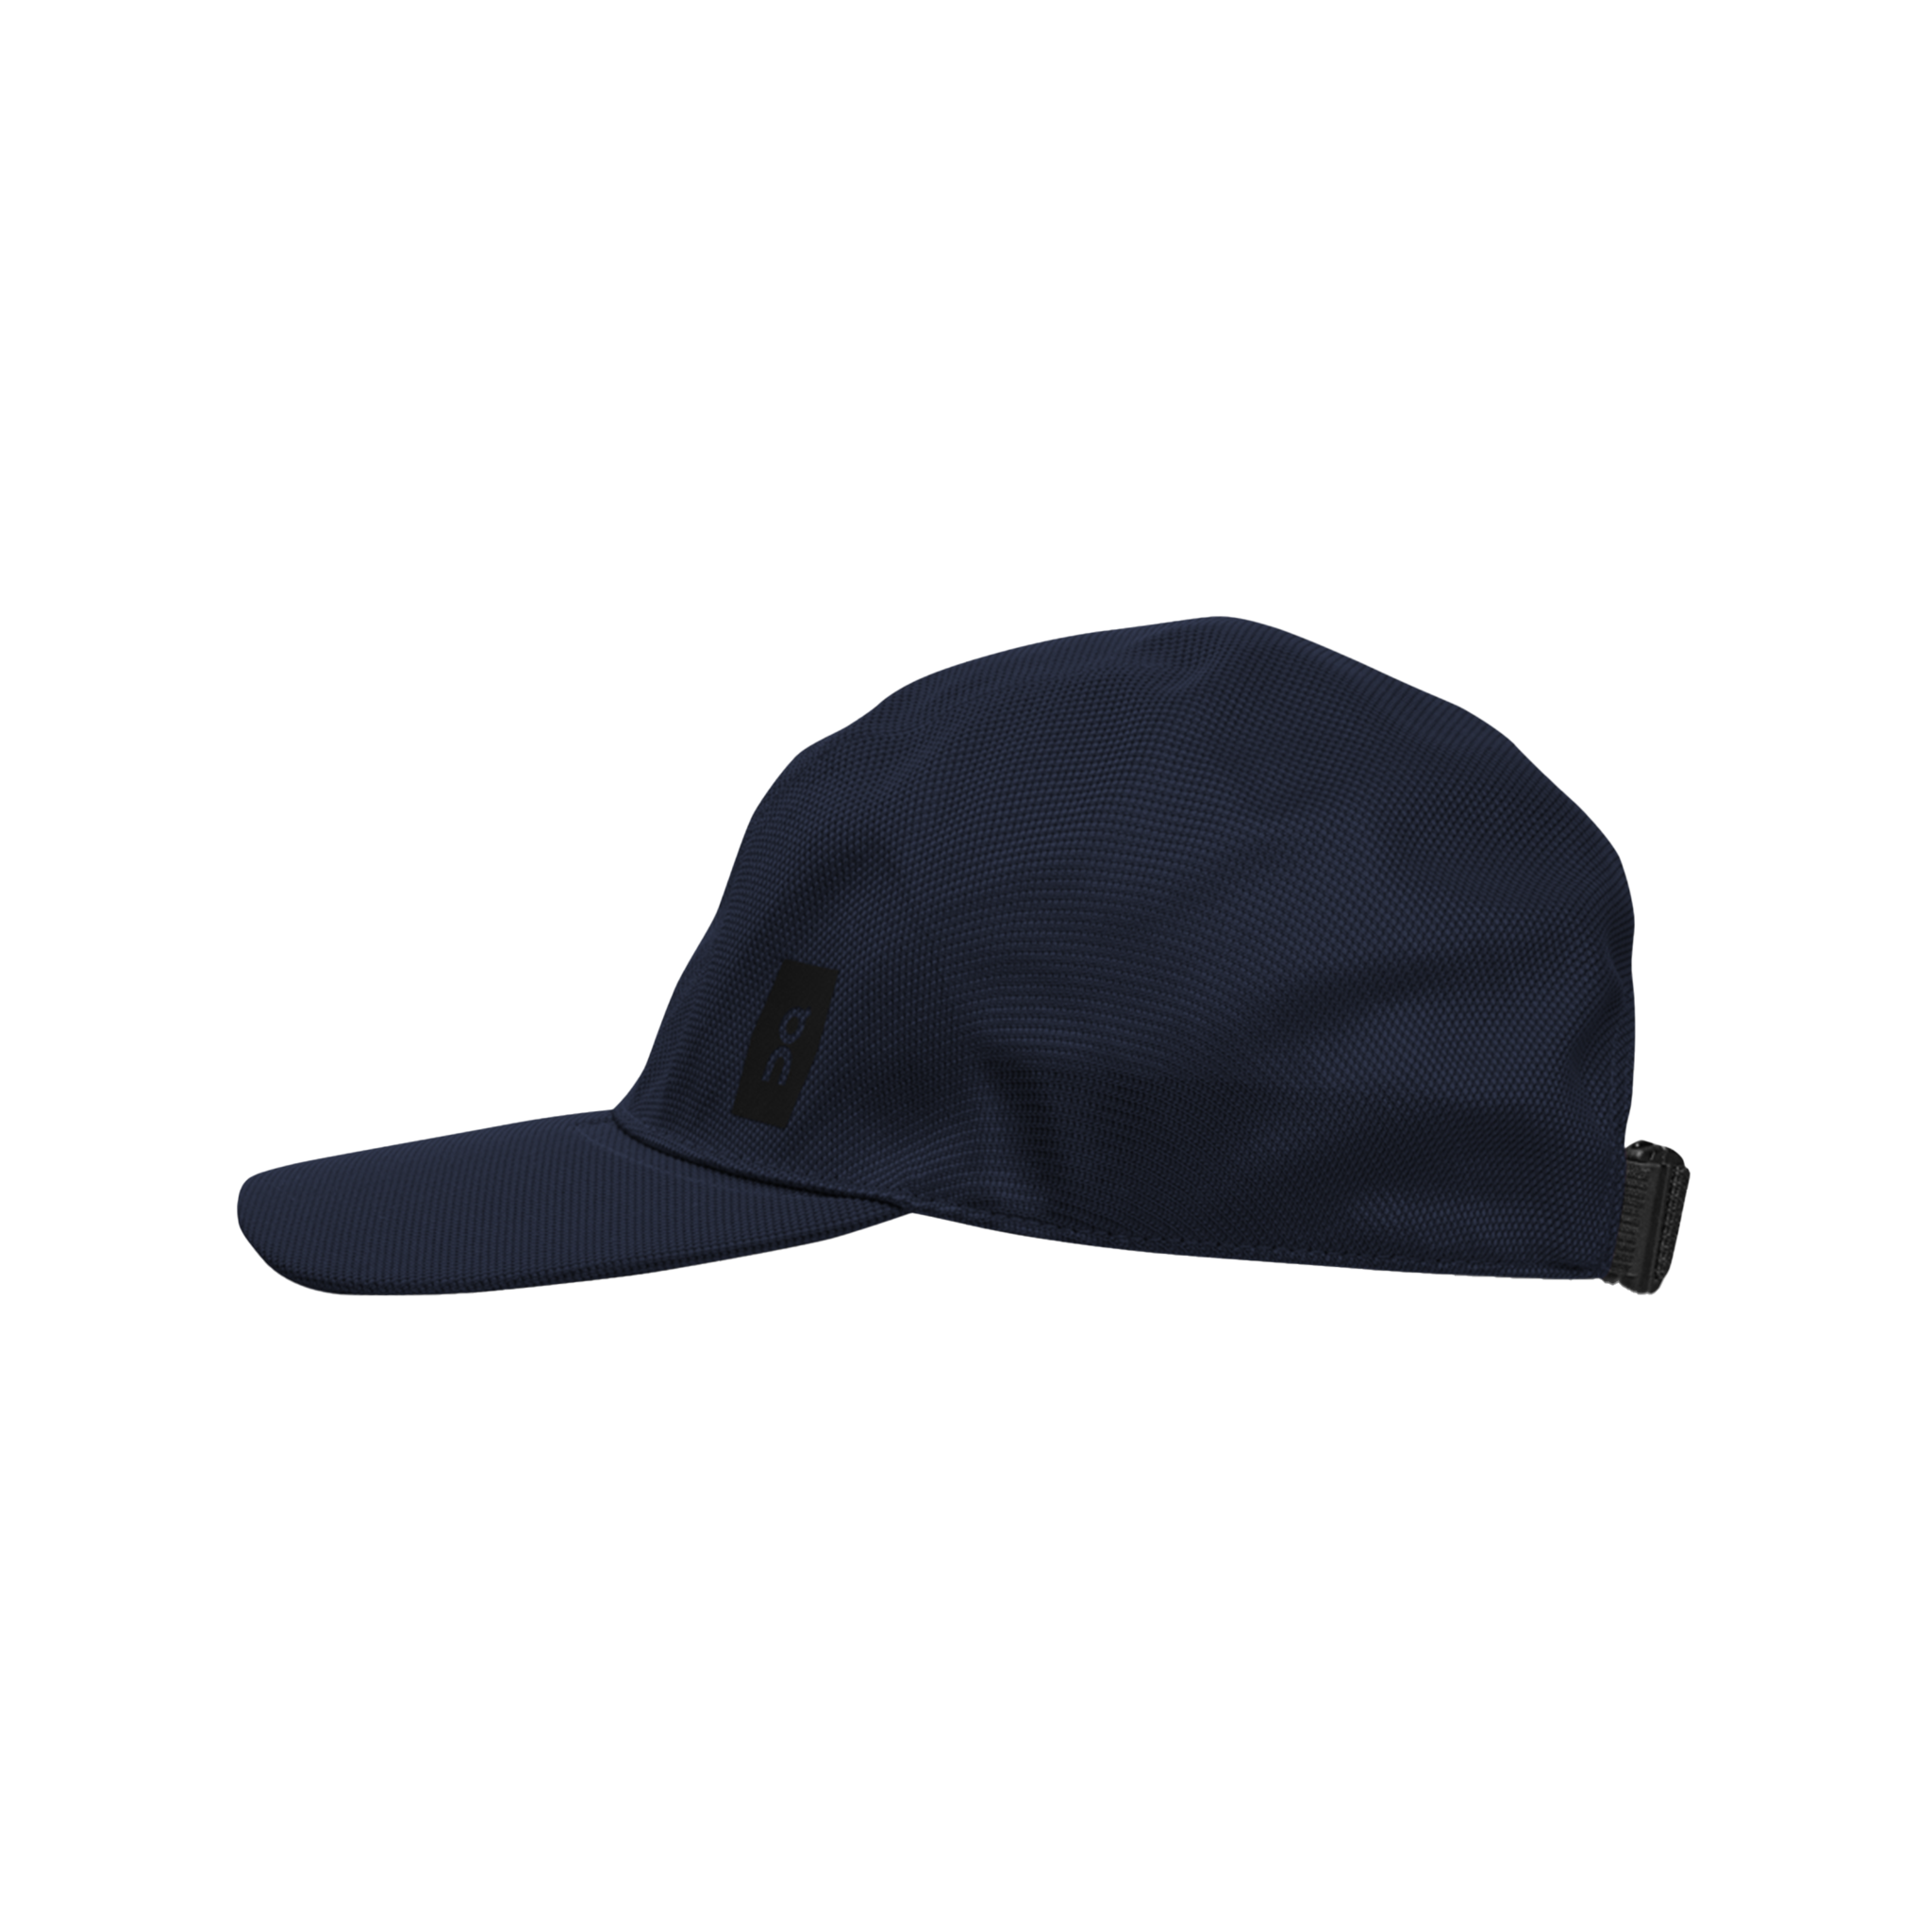 ON Moulded Cap Unisex - Navy